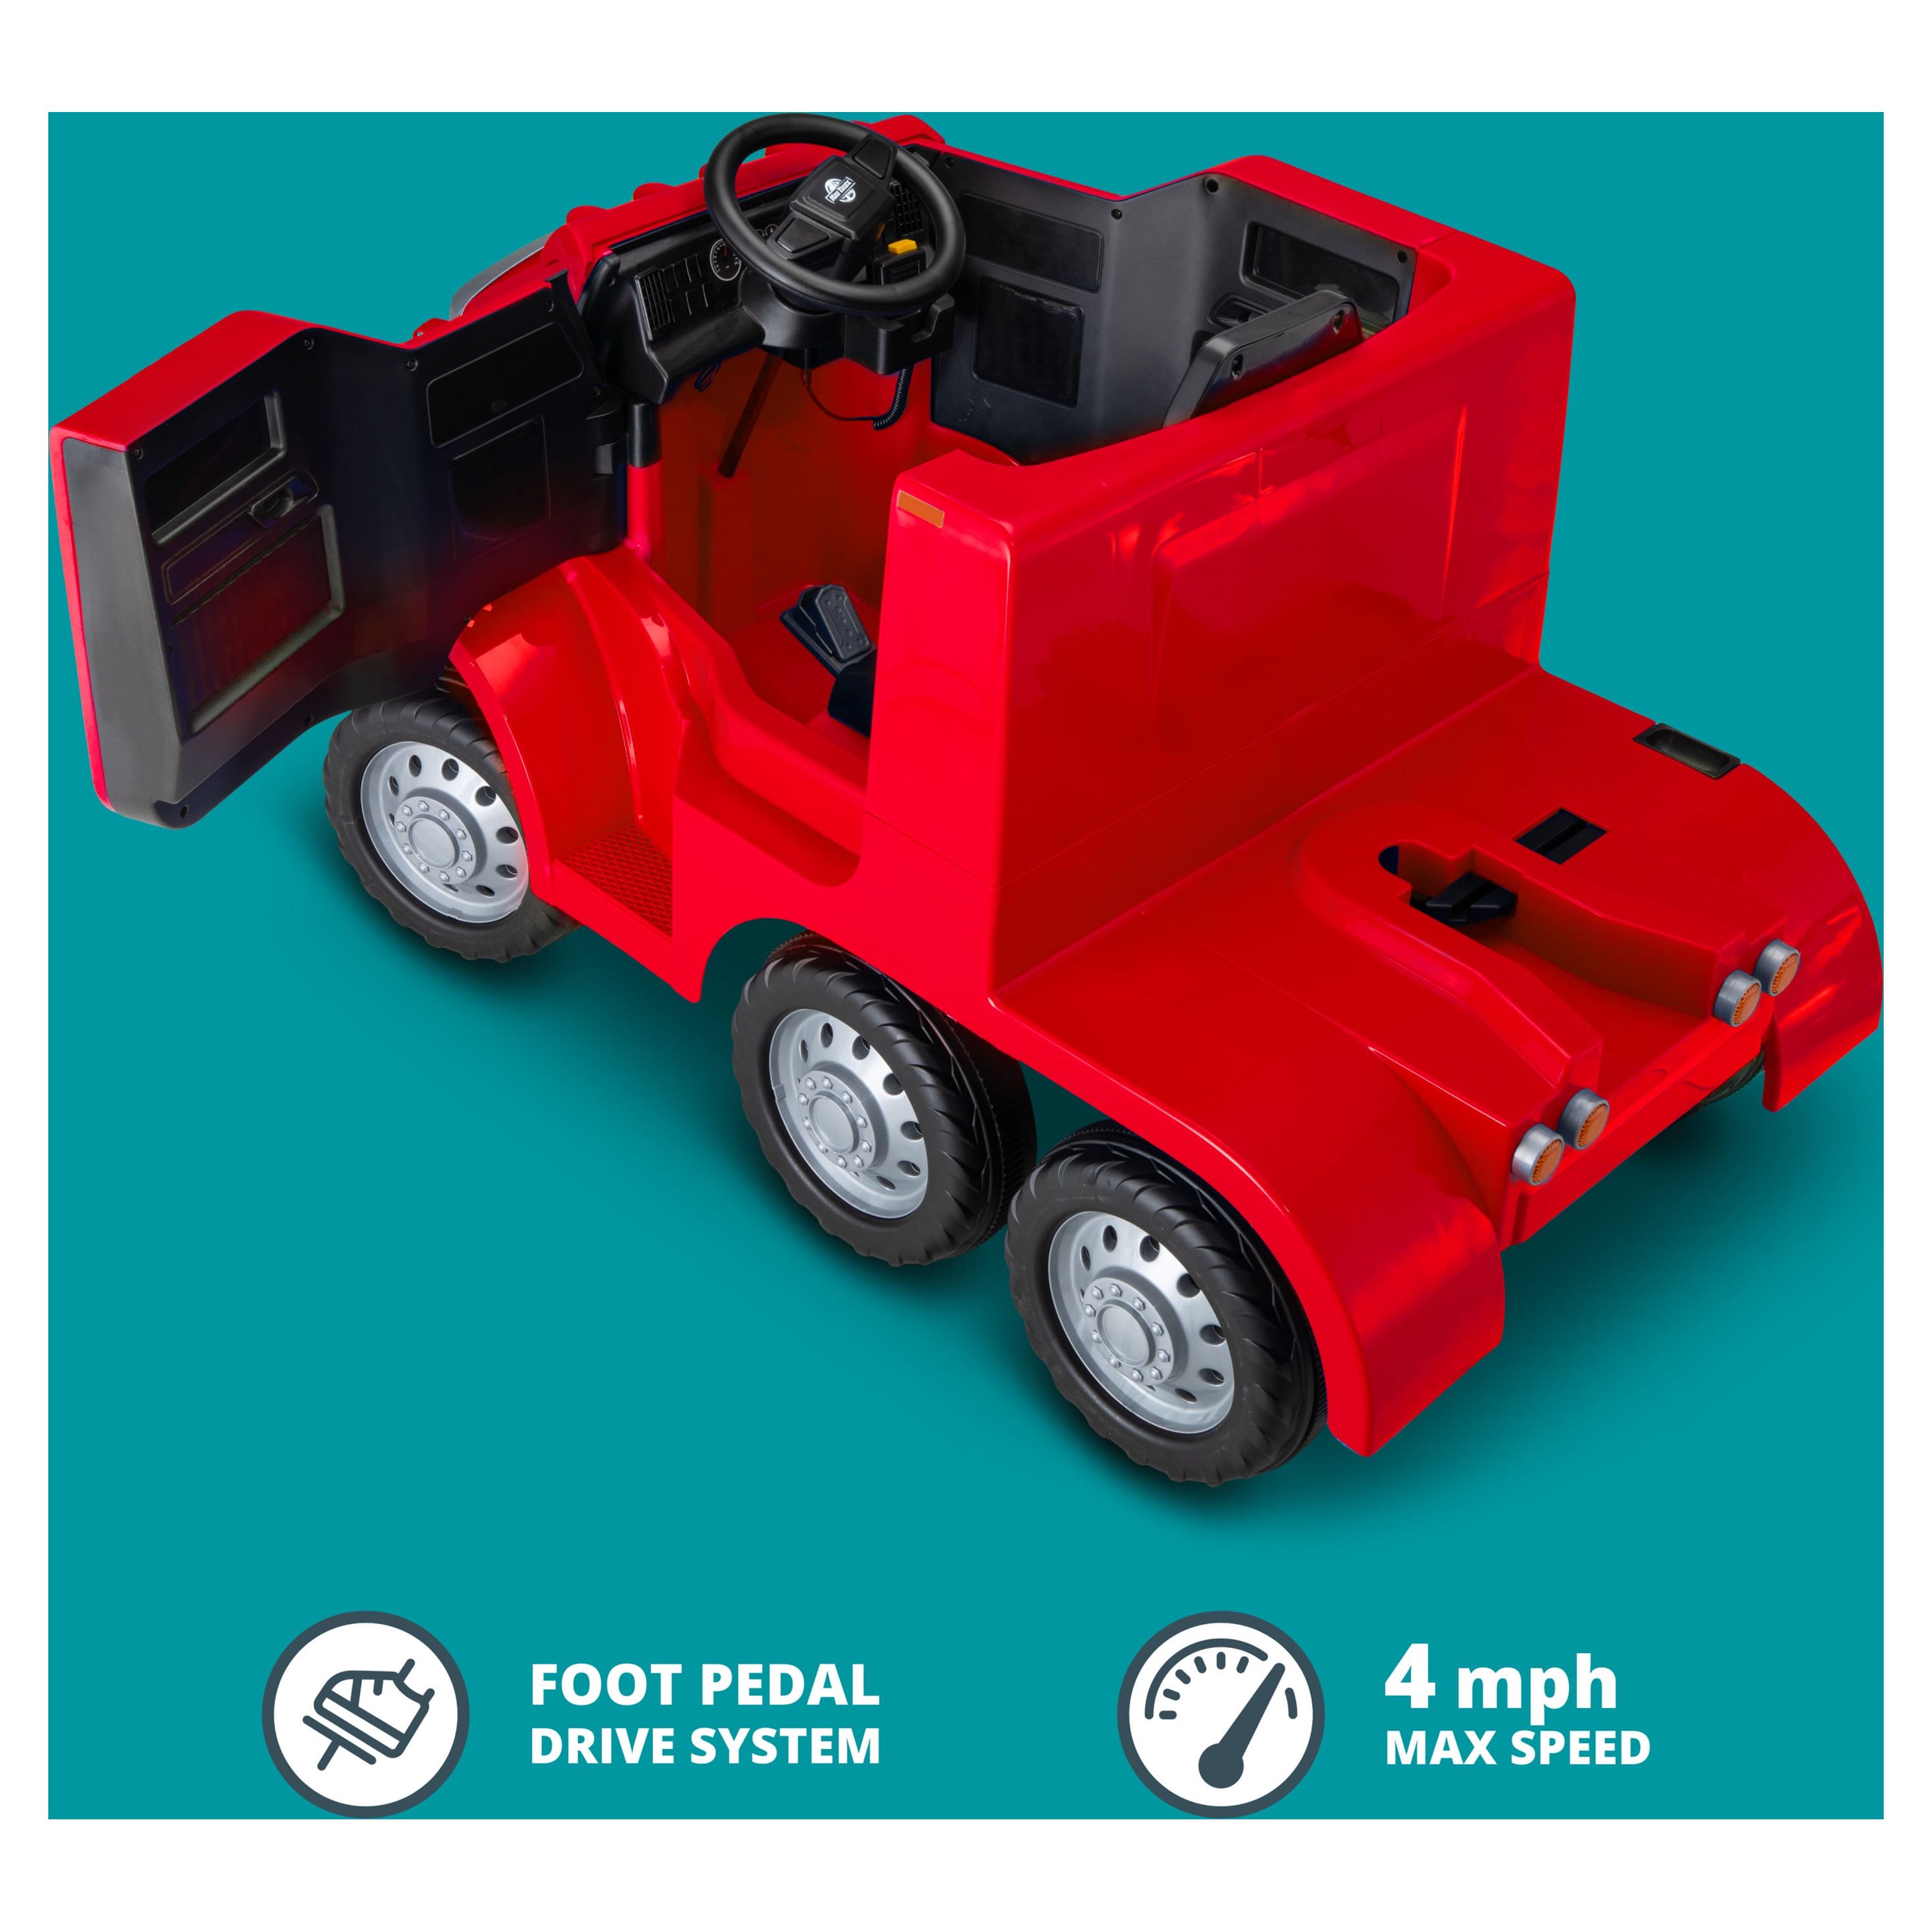 Semi-Truck and Trailer Ride-On Toy by Kid Trax Red, Rig - image 4 of 8